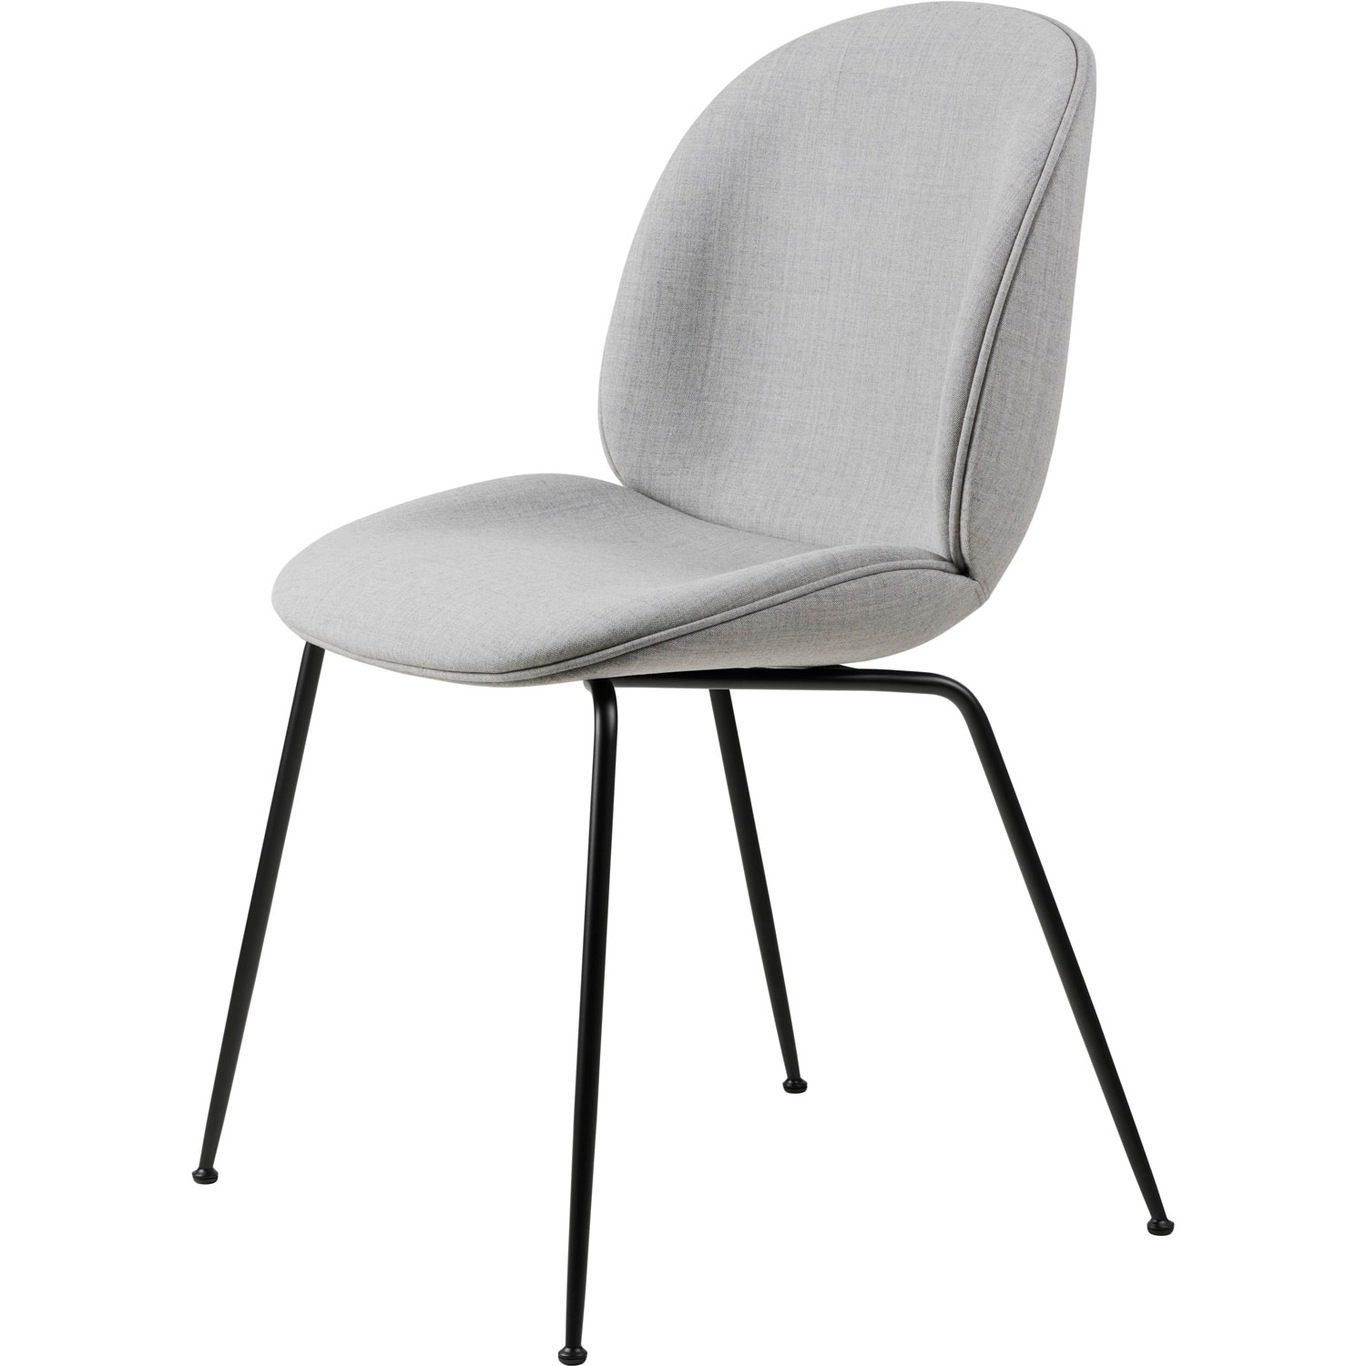 Beetle Chair Upholstered / Conical Base, Remix 3 123